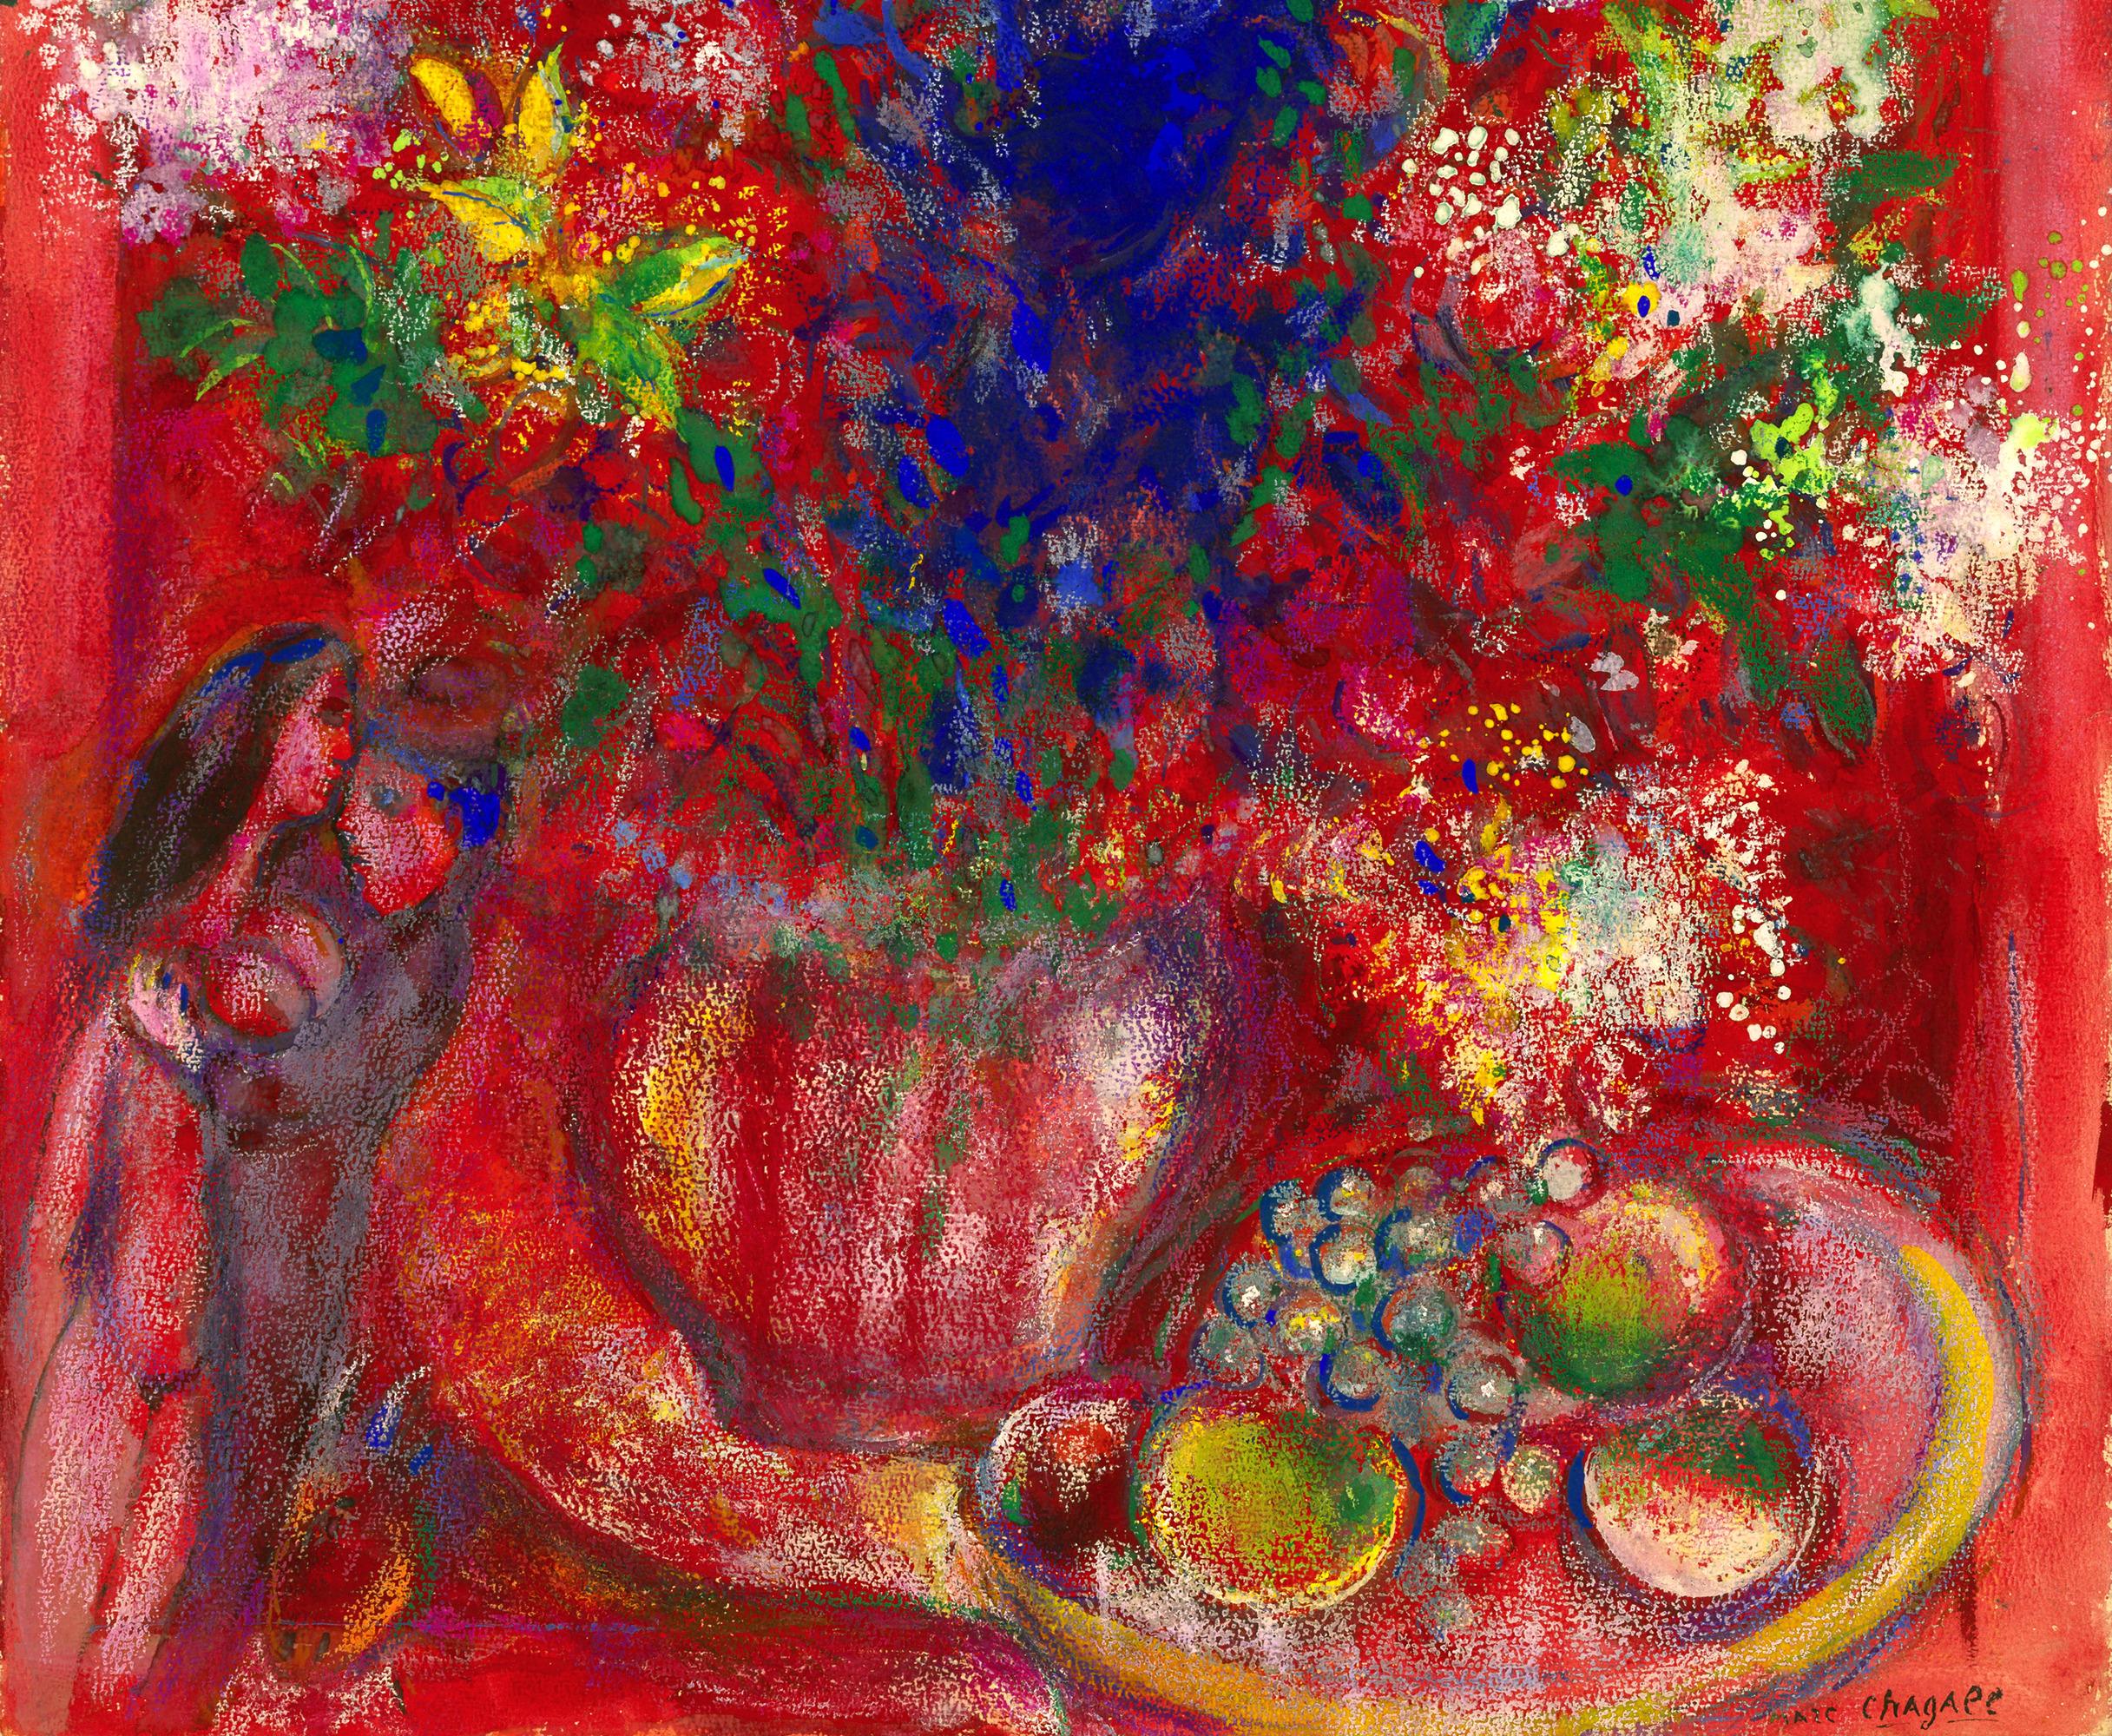 Marc Chagall
1887-1985  Russian

Les fleurs rouges


Signed “Marc Chagall“ (lower right)
Gouache and pastel on paper

An intoxicating all-over composition rendered in a dizzying array of pink and red hues, Marc Chagall’s Les fleurs rouges is a